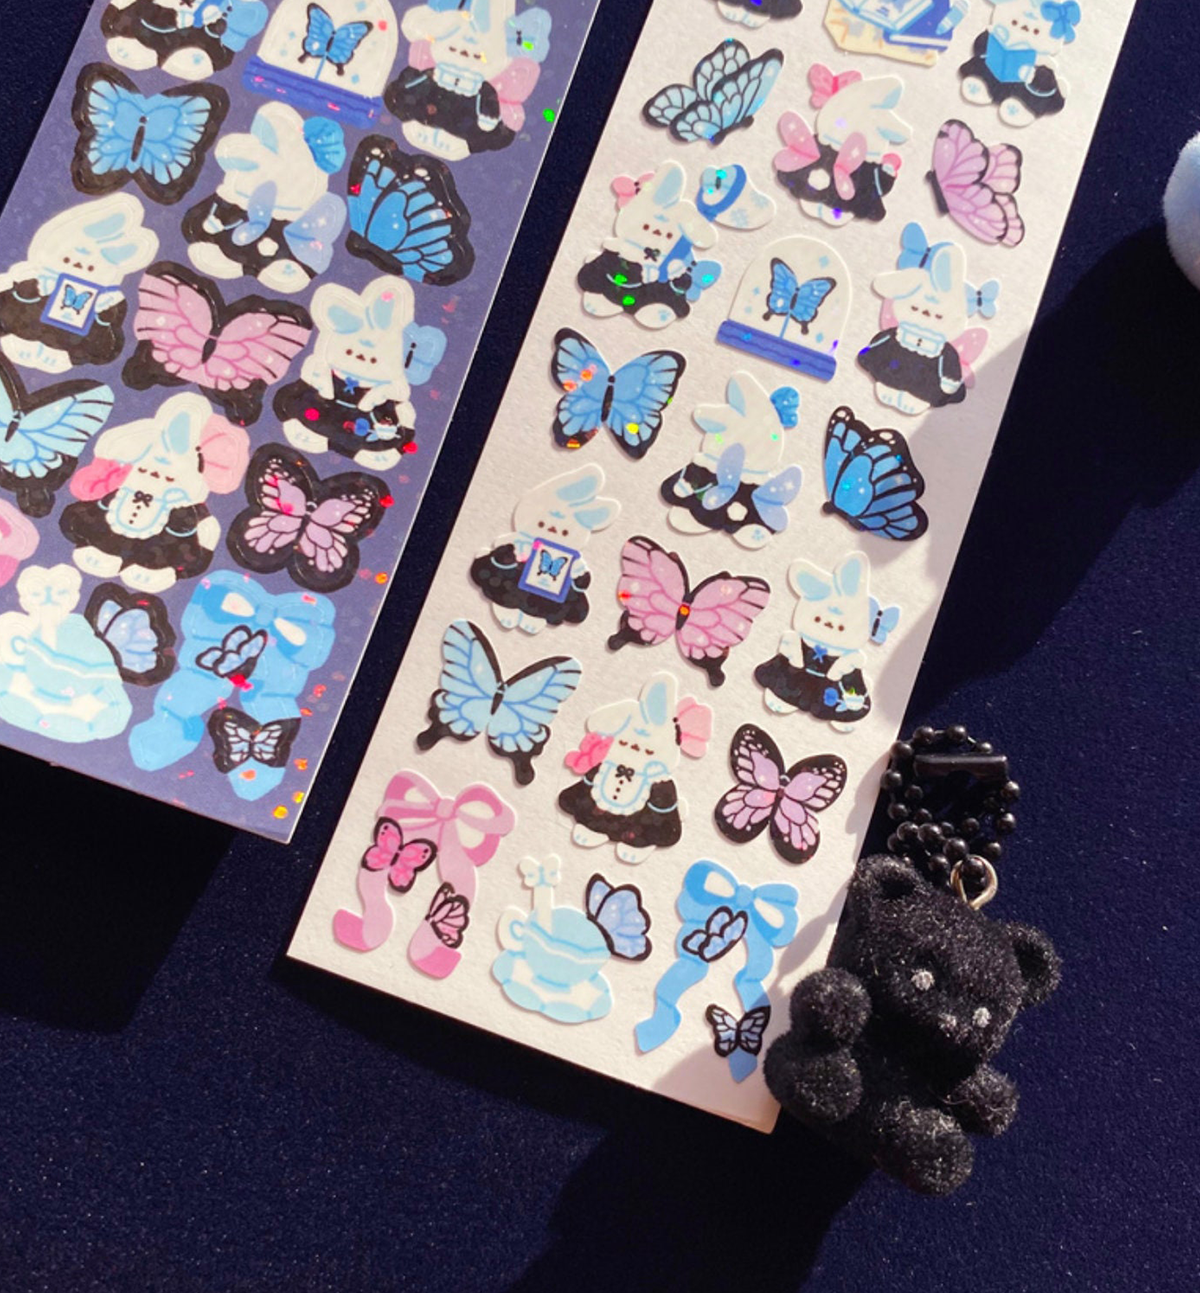 Butterfly Collector Rabbit Hologram Seal Sticker